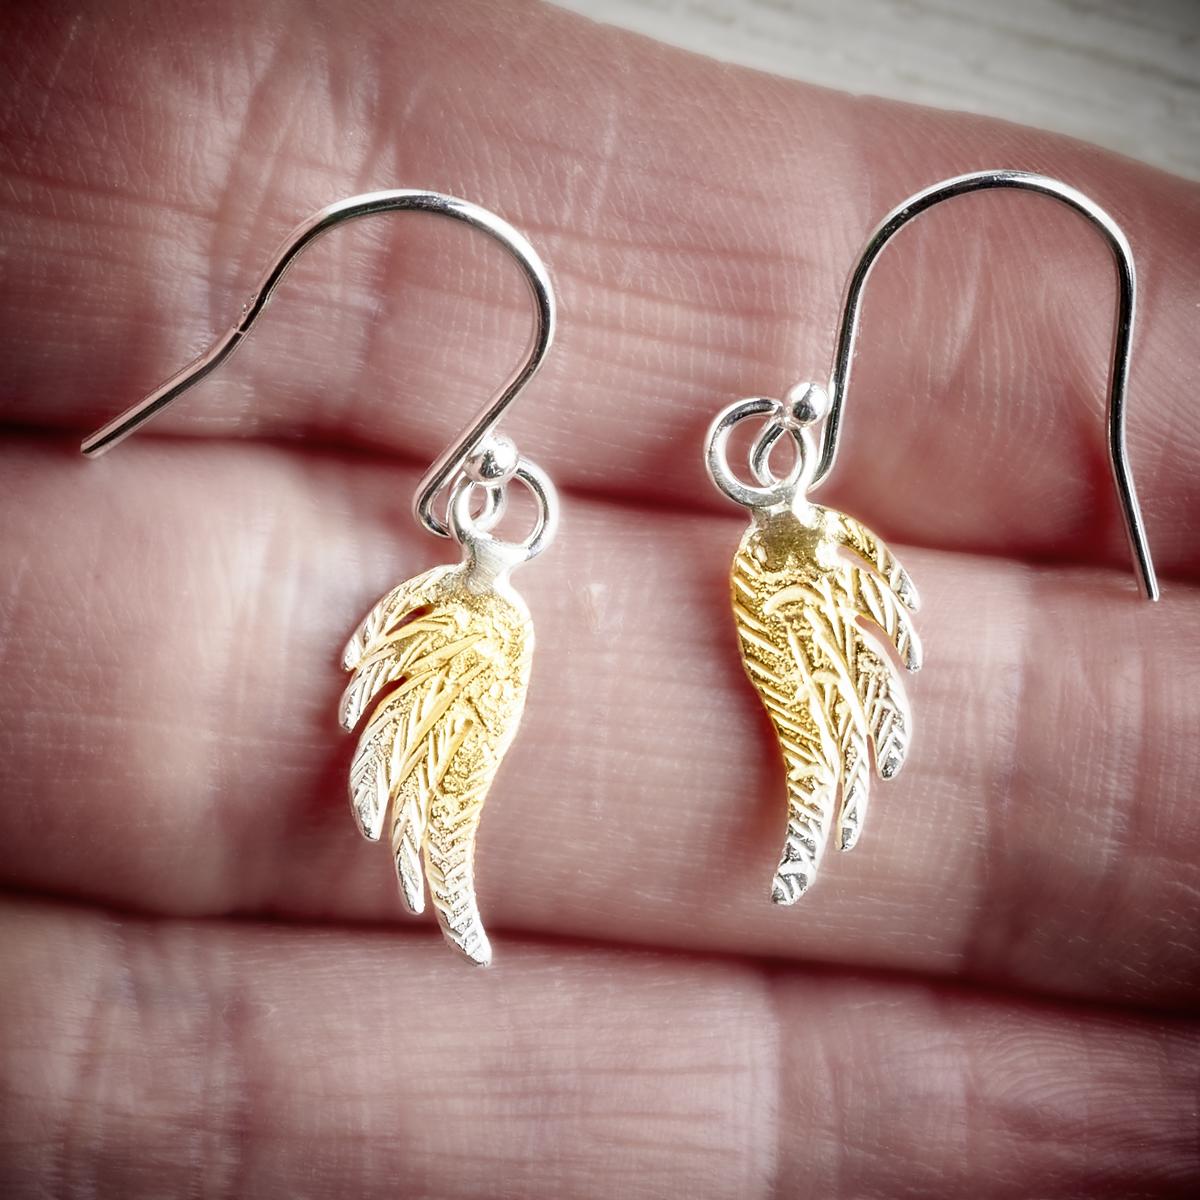 fi mehra silver and gold wings drop earrings available from the jewellery makers. image property of EMMA WHITE-1